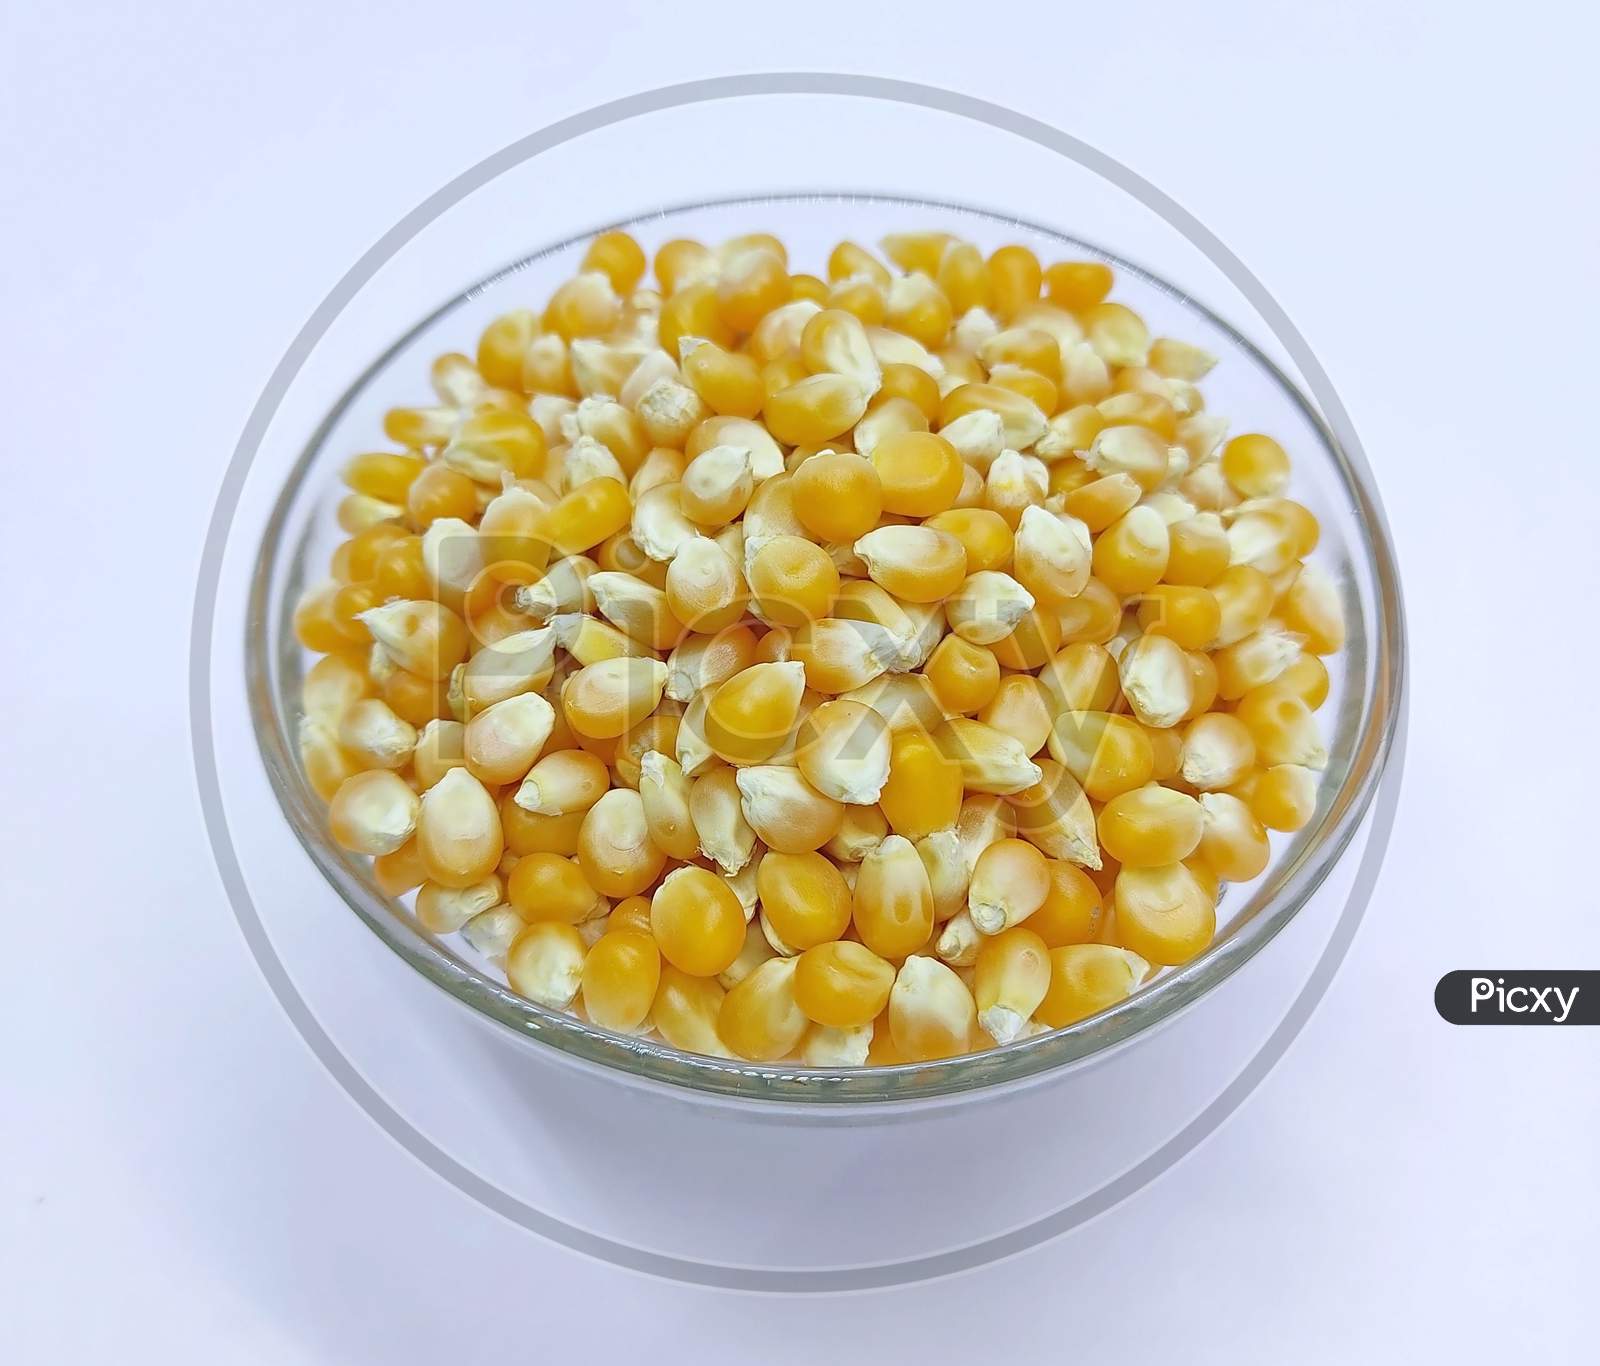 Corn Kernels, Falling Corns Seeds, Yellow Dry Corn Grains In Bowl On White Background